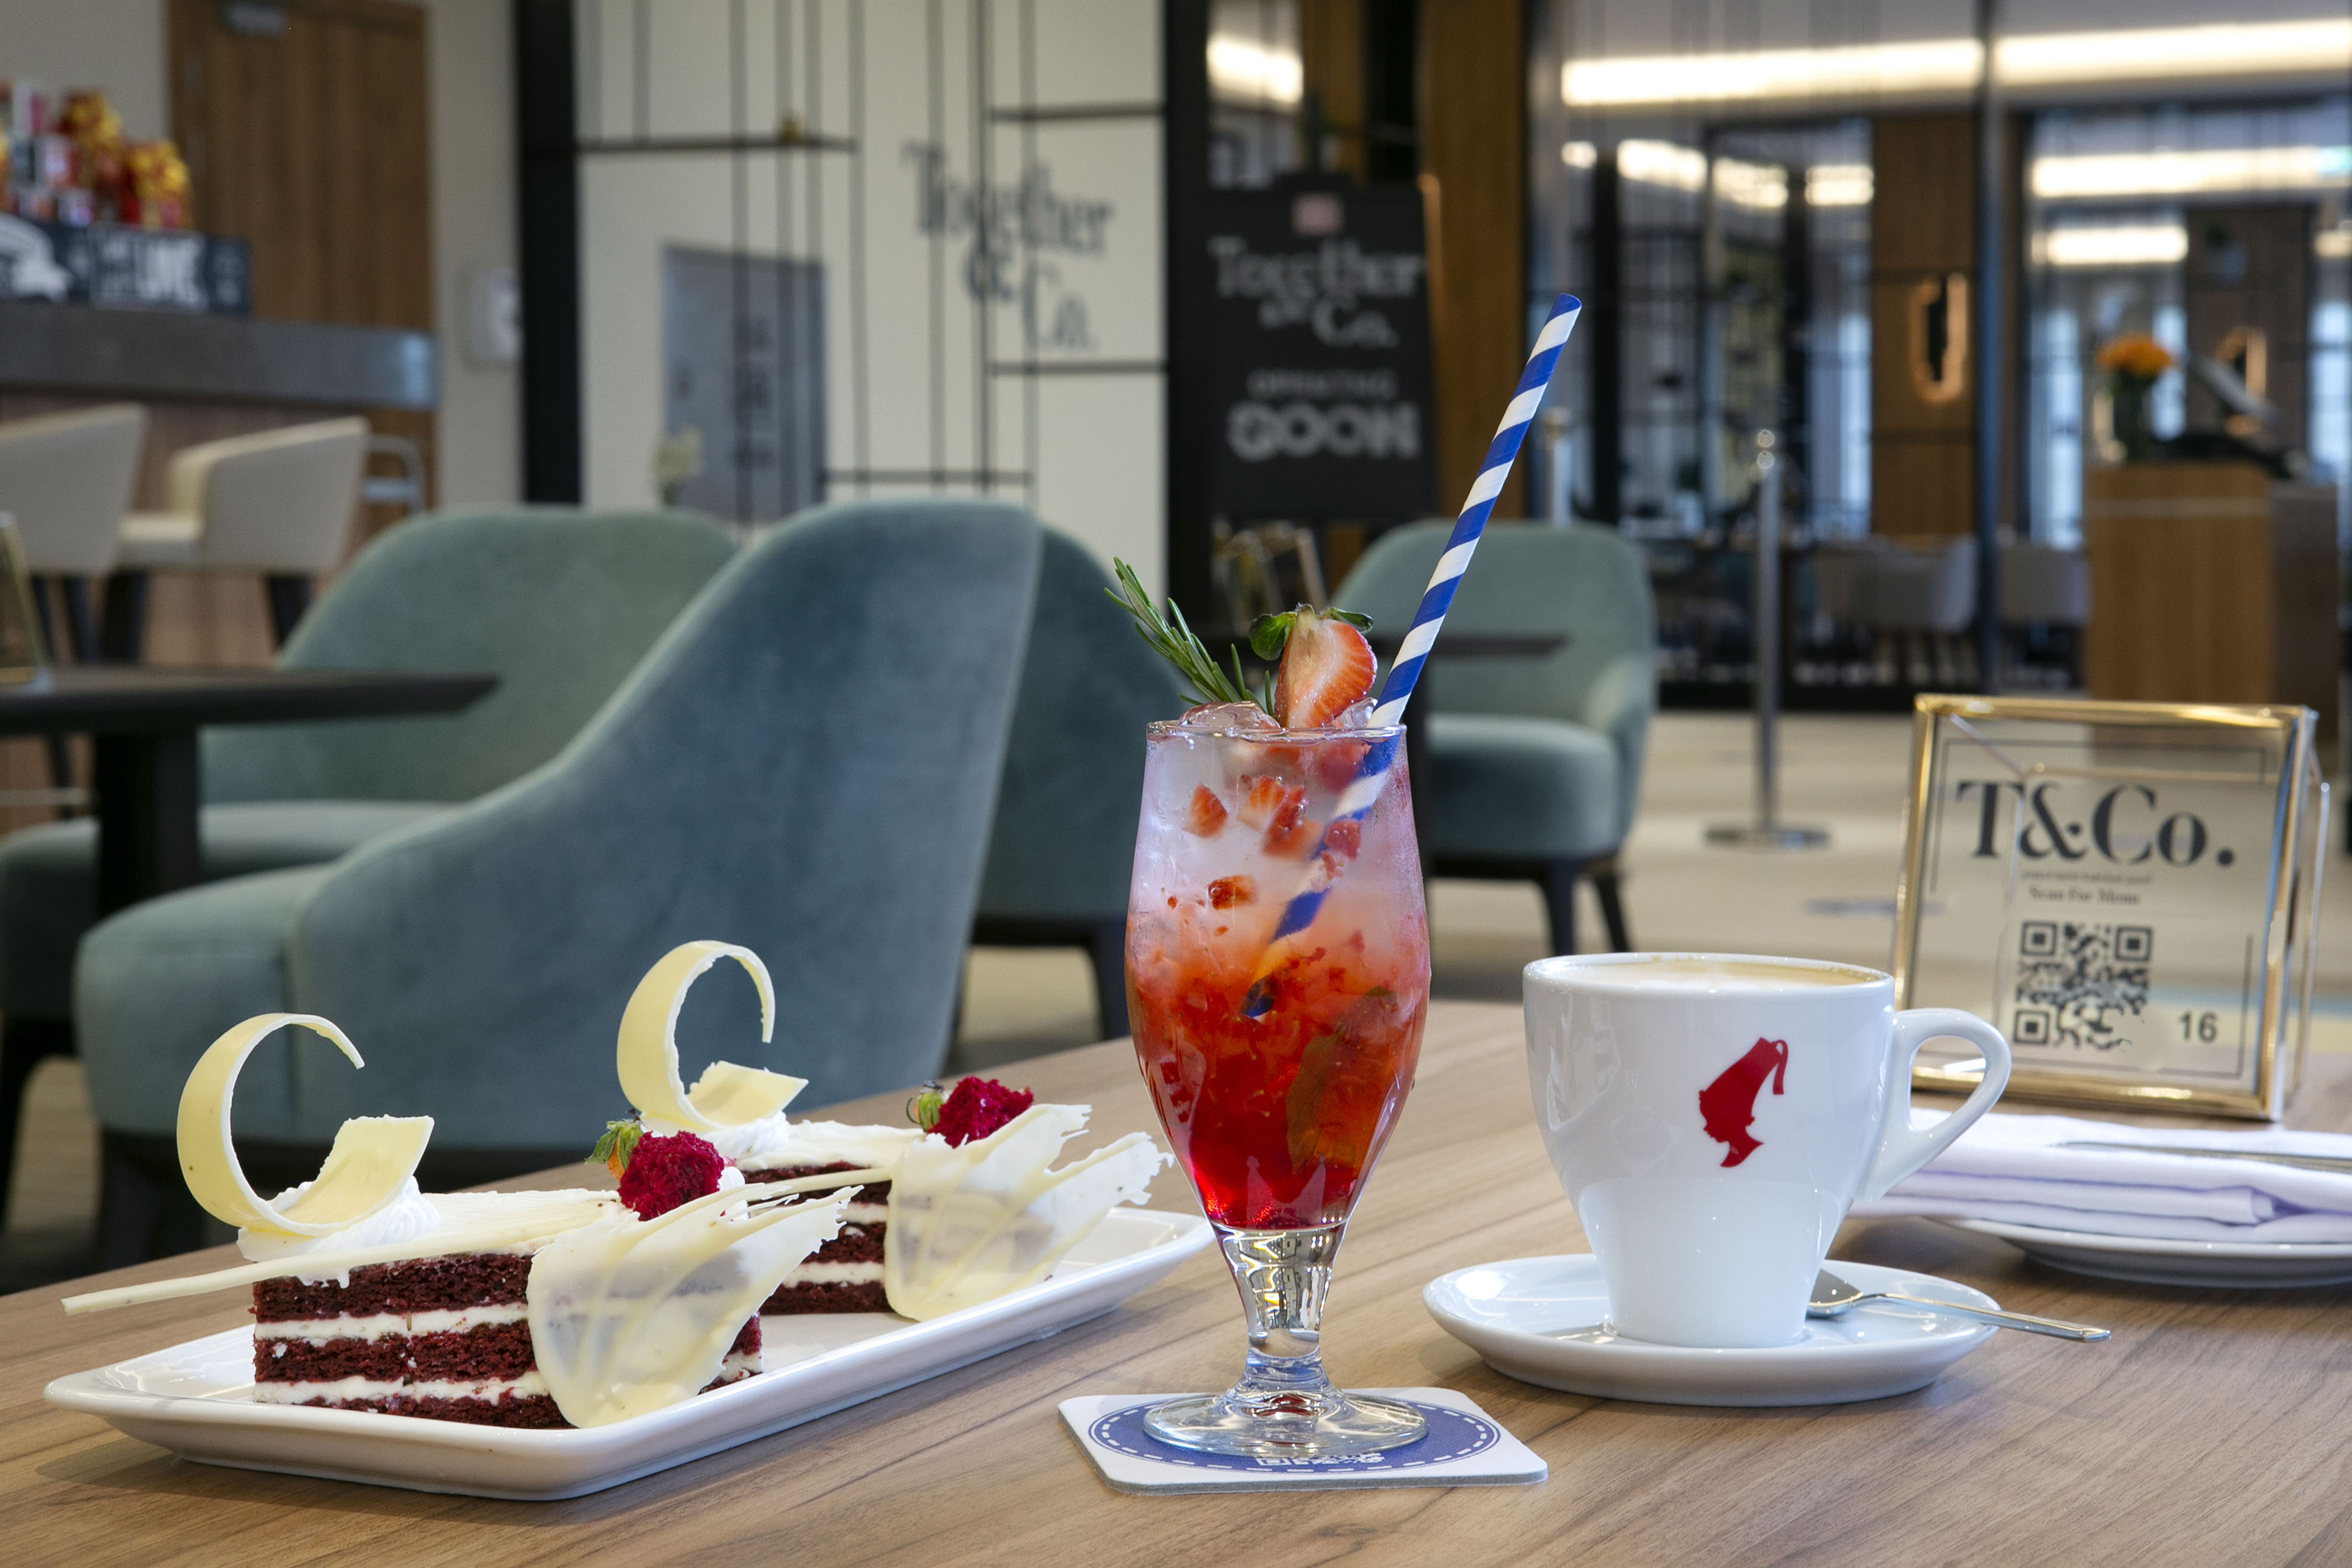 Close-up of table in lounge with cakes, coffee and fruit drink